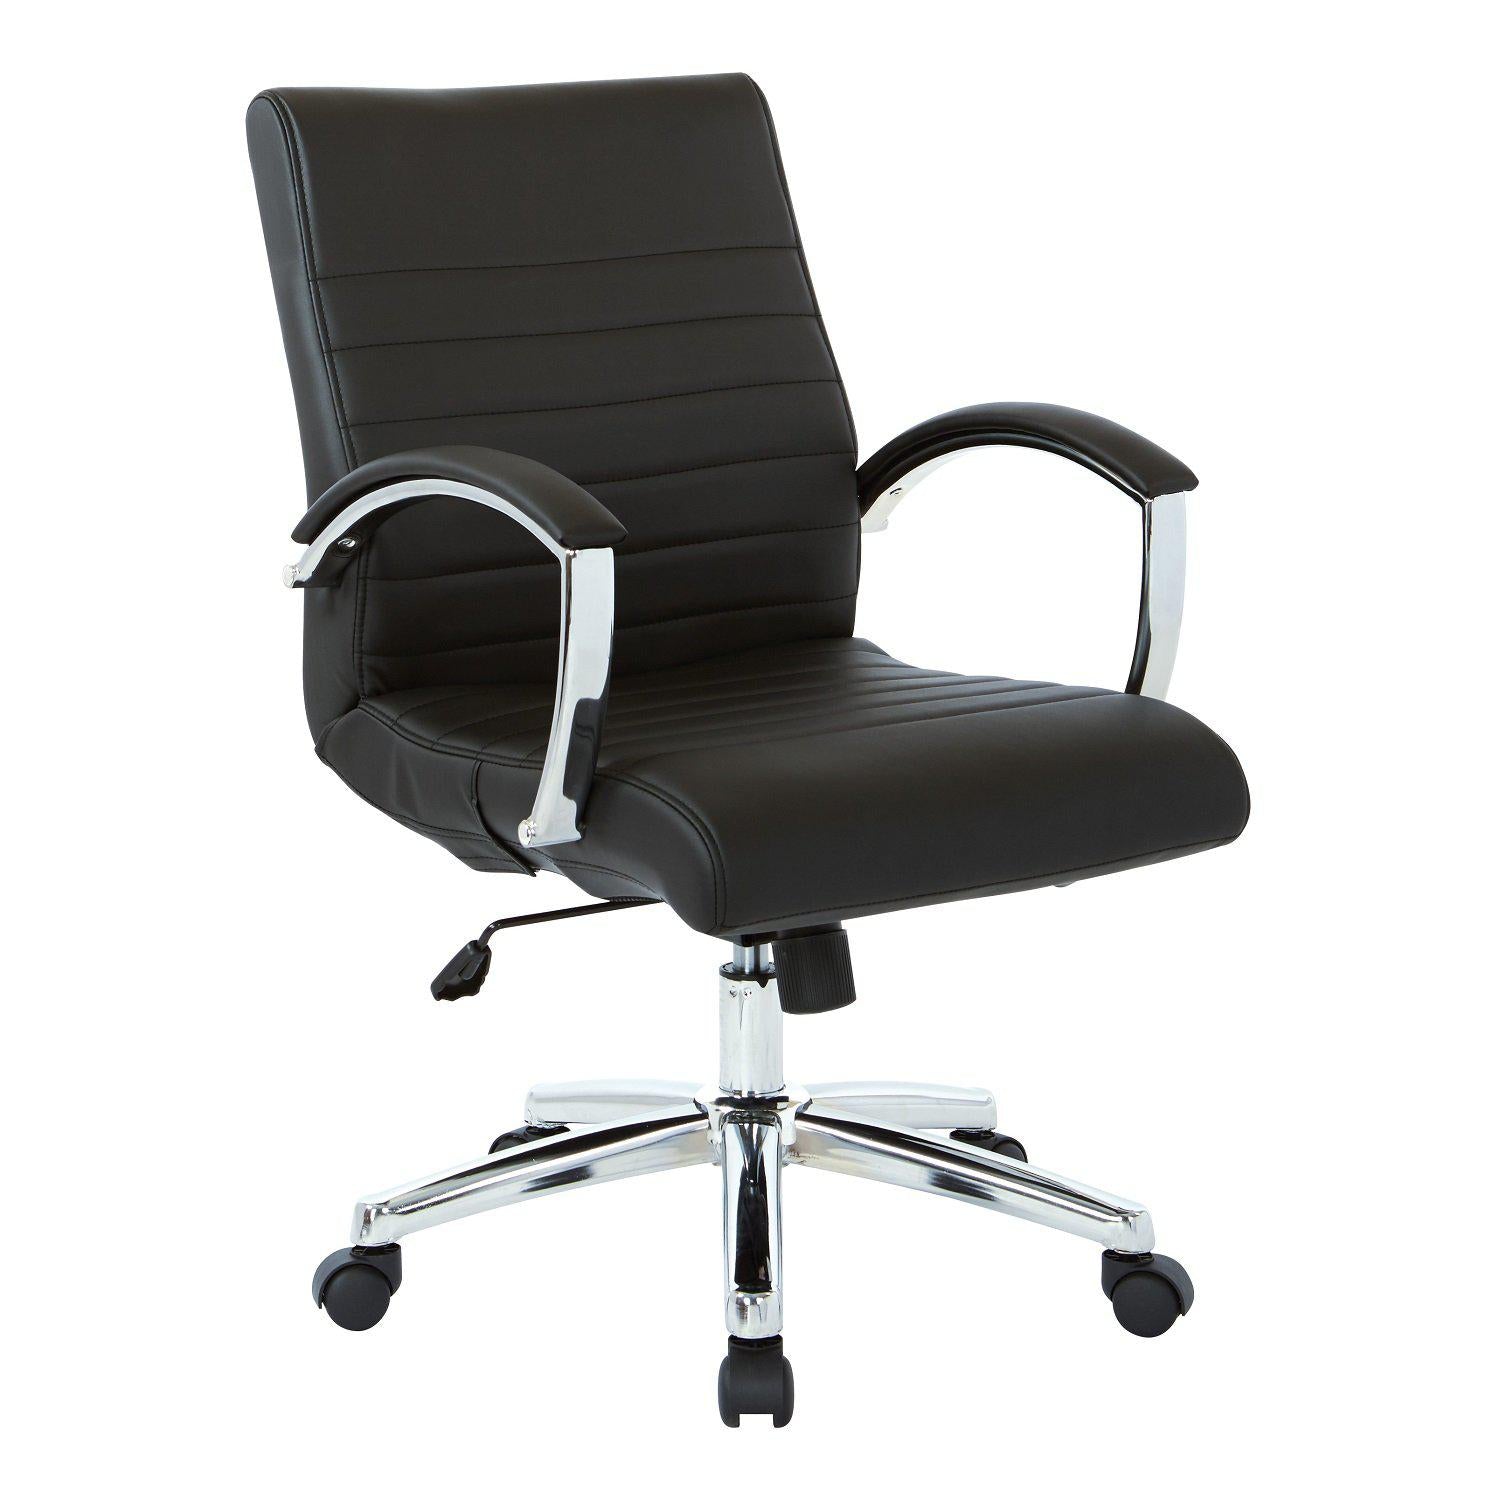 Executive Low-Back Faux Leather Chair with Padded Arms and Chrome Finish Base